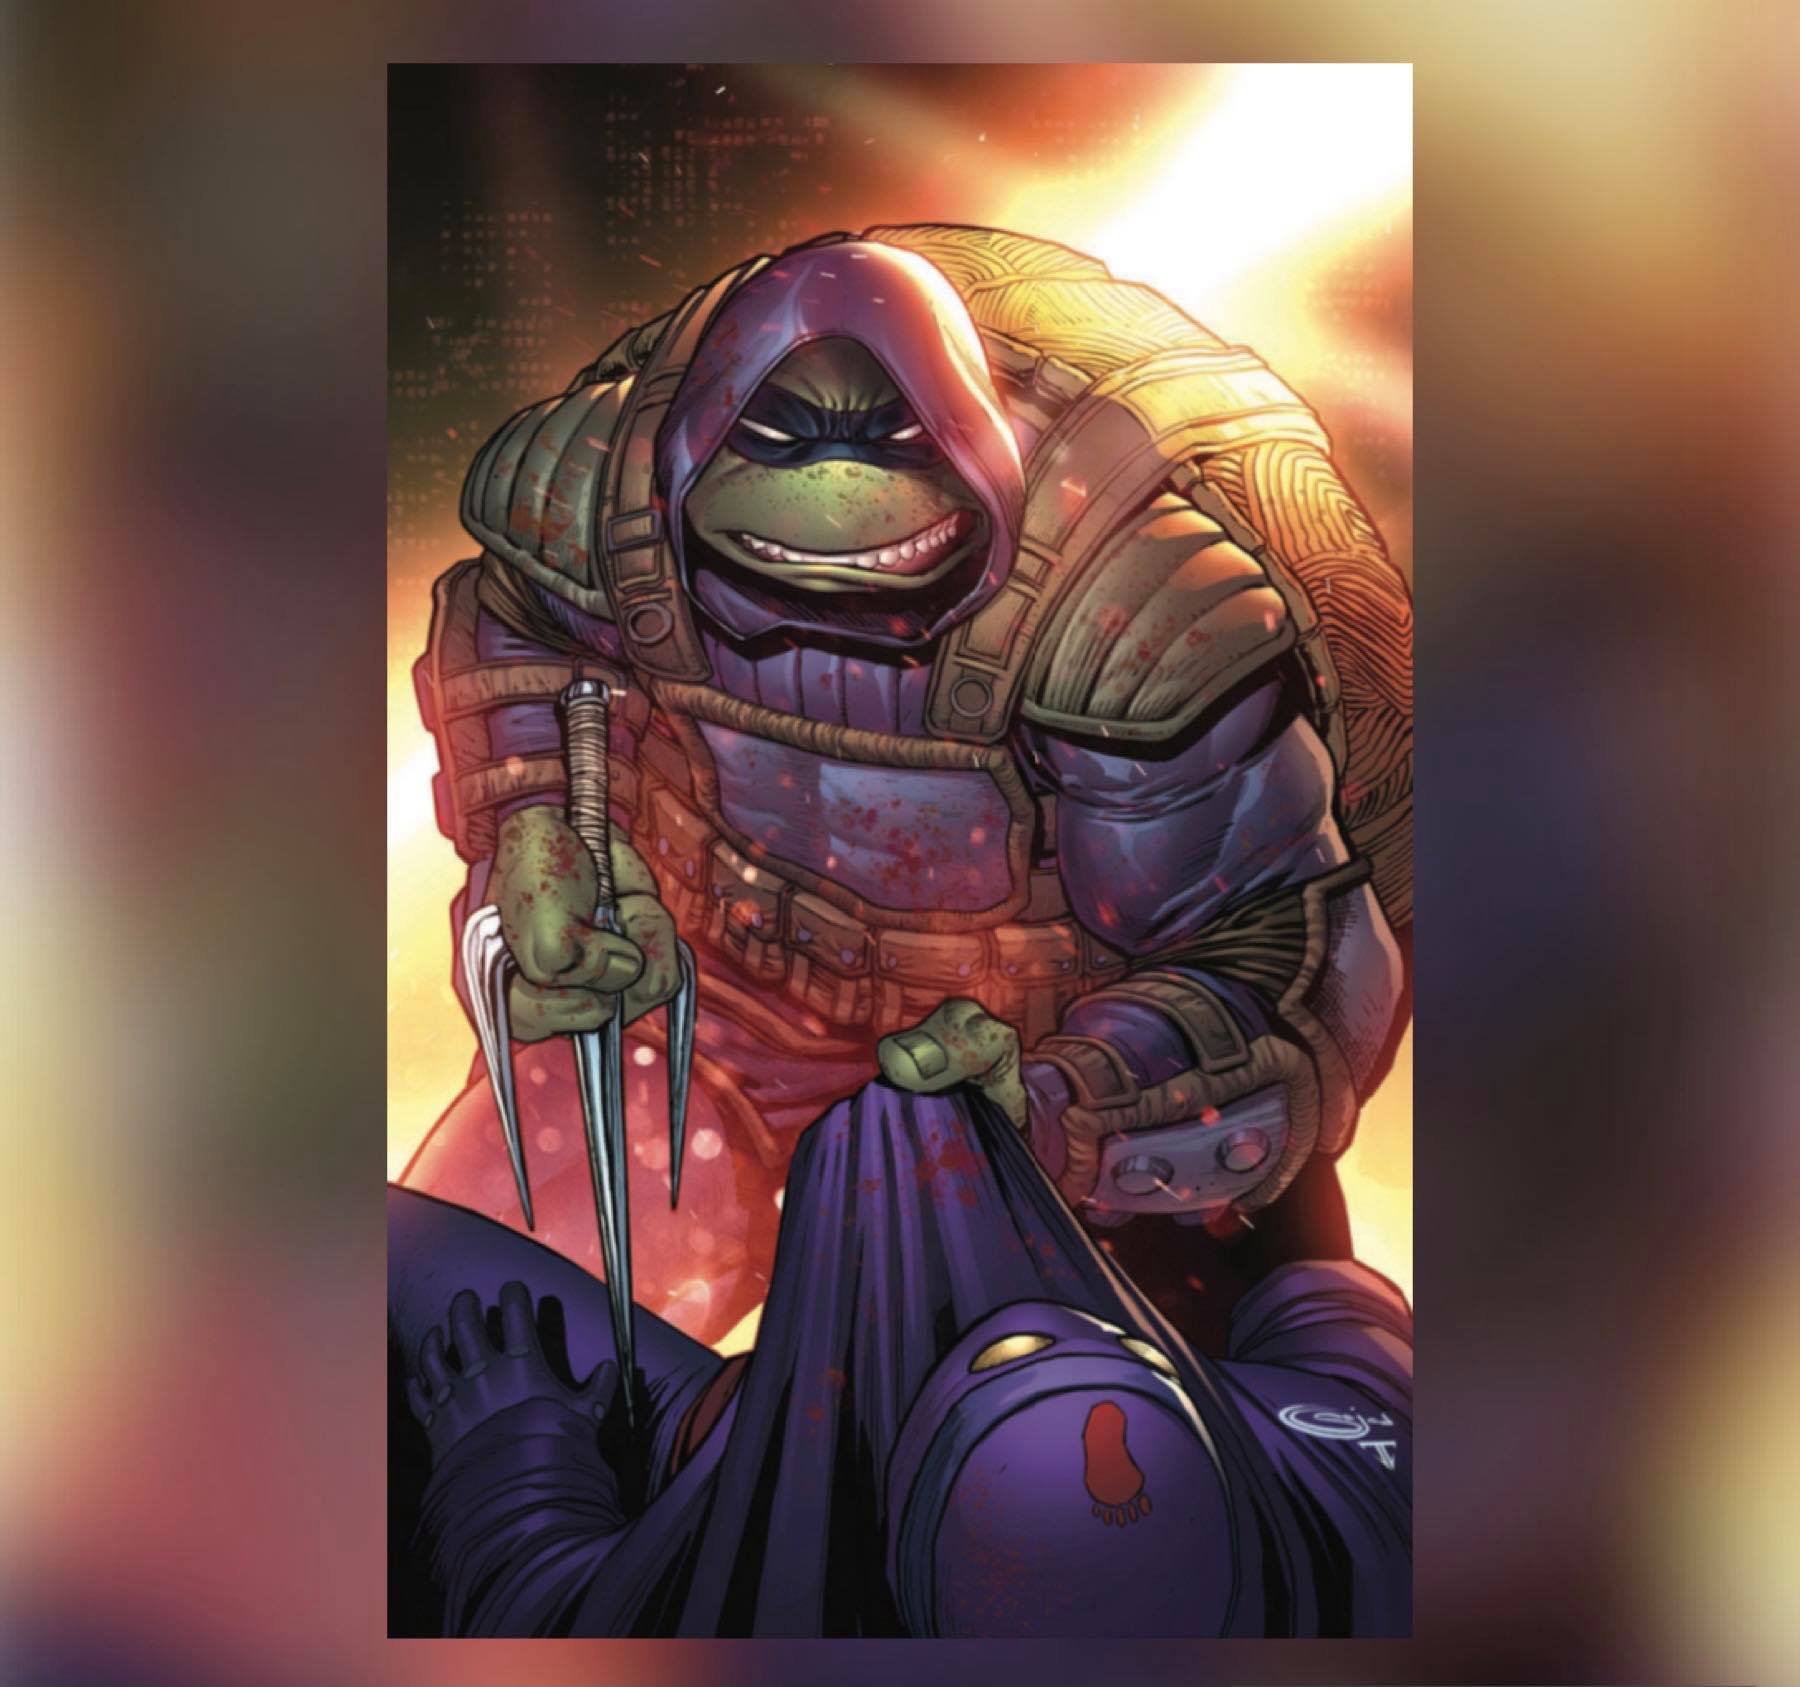 TMNT The Last Ronin #3 (of 5) Sajad Shah Exclusive Virgin Cover - State of Comics